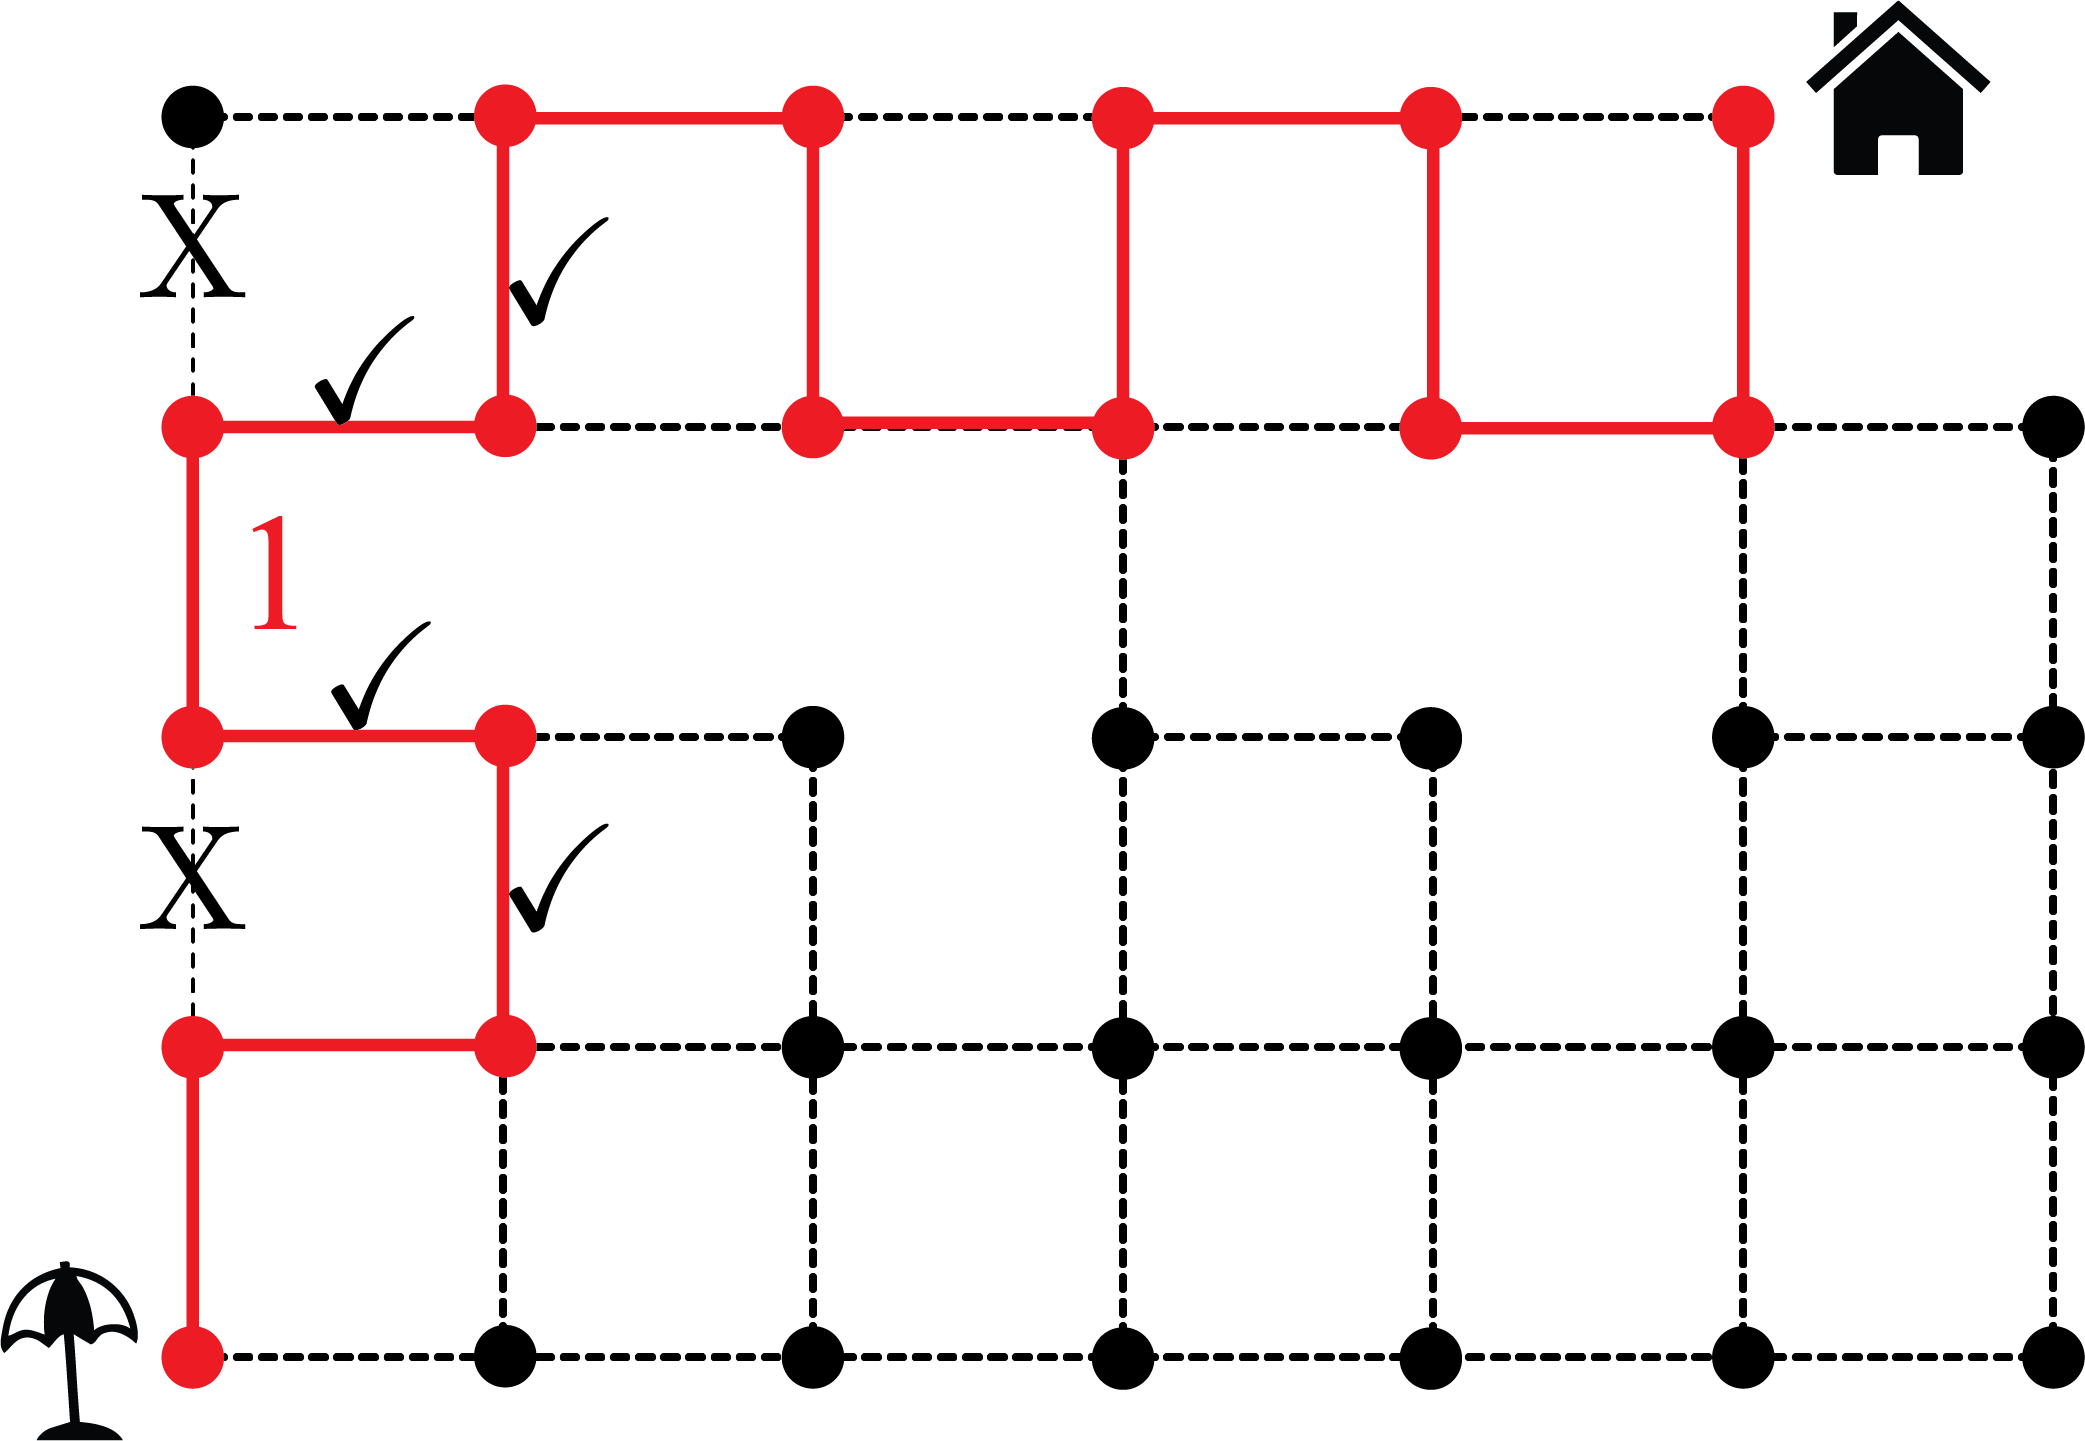 A path from the beach to the house made up of a sequence of line segments in the grid is highlighted. The path passes through line segment 1.